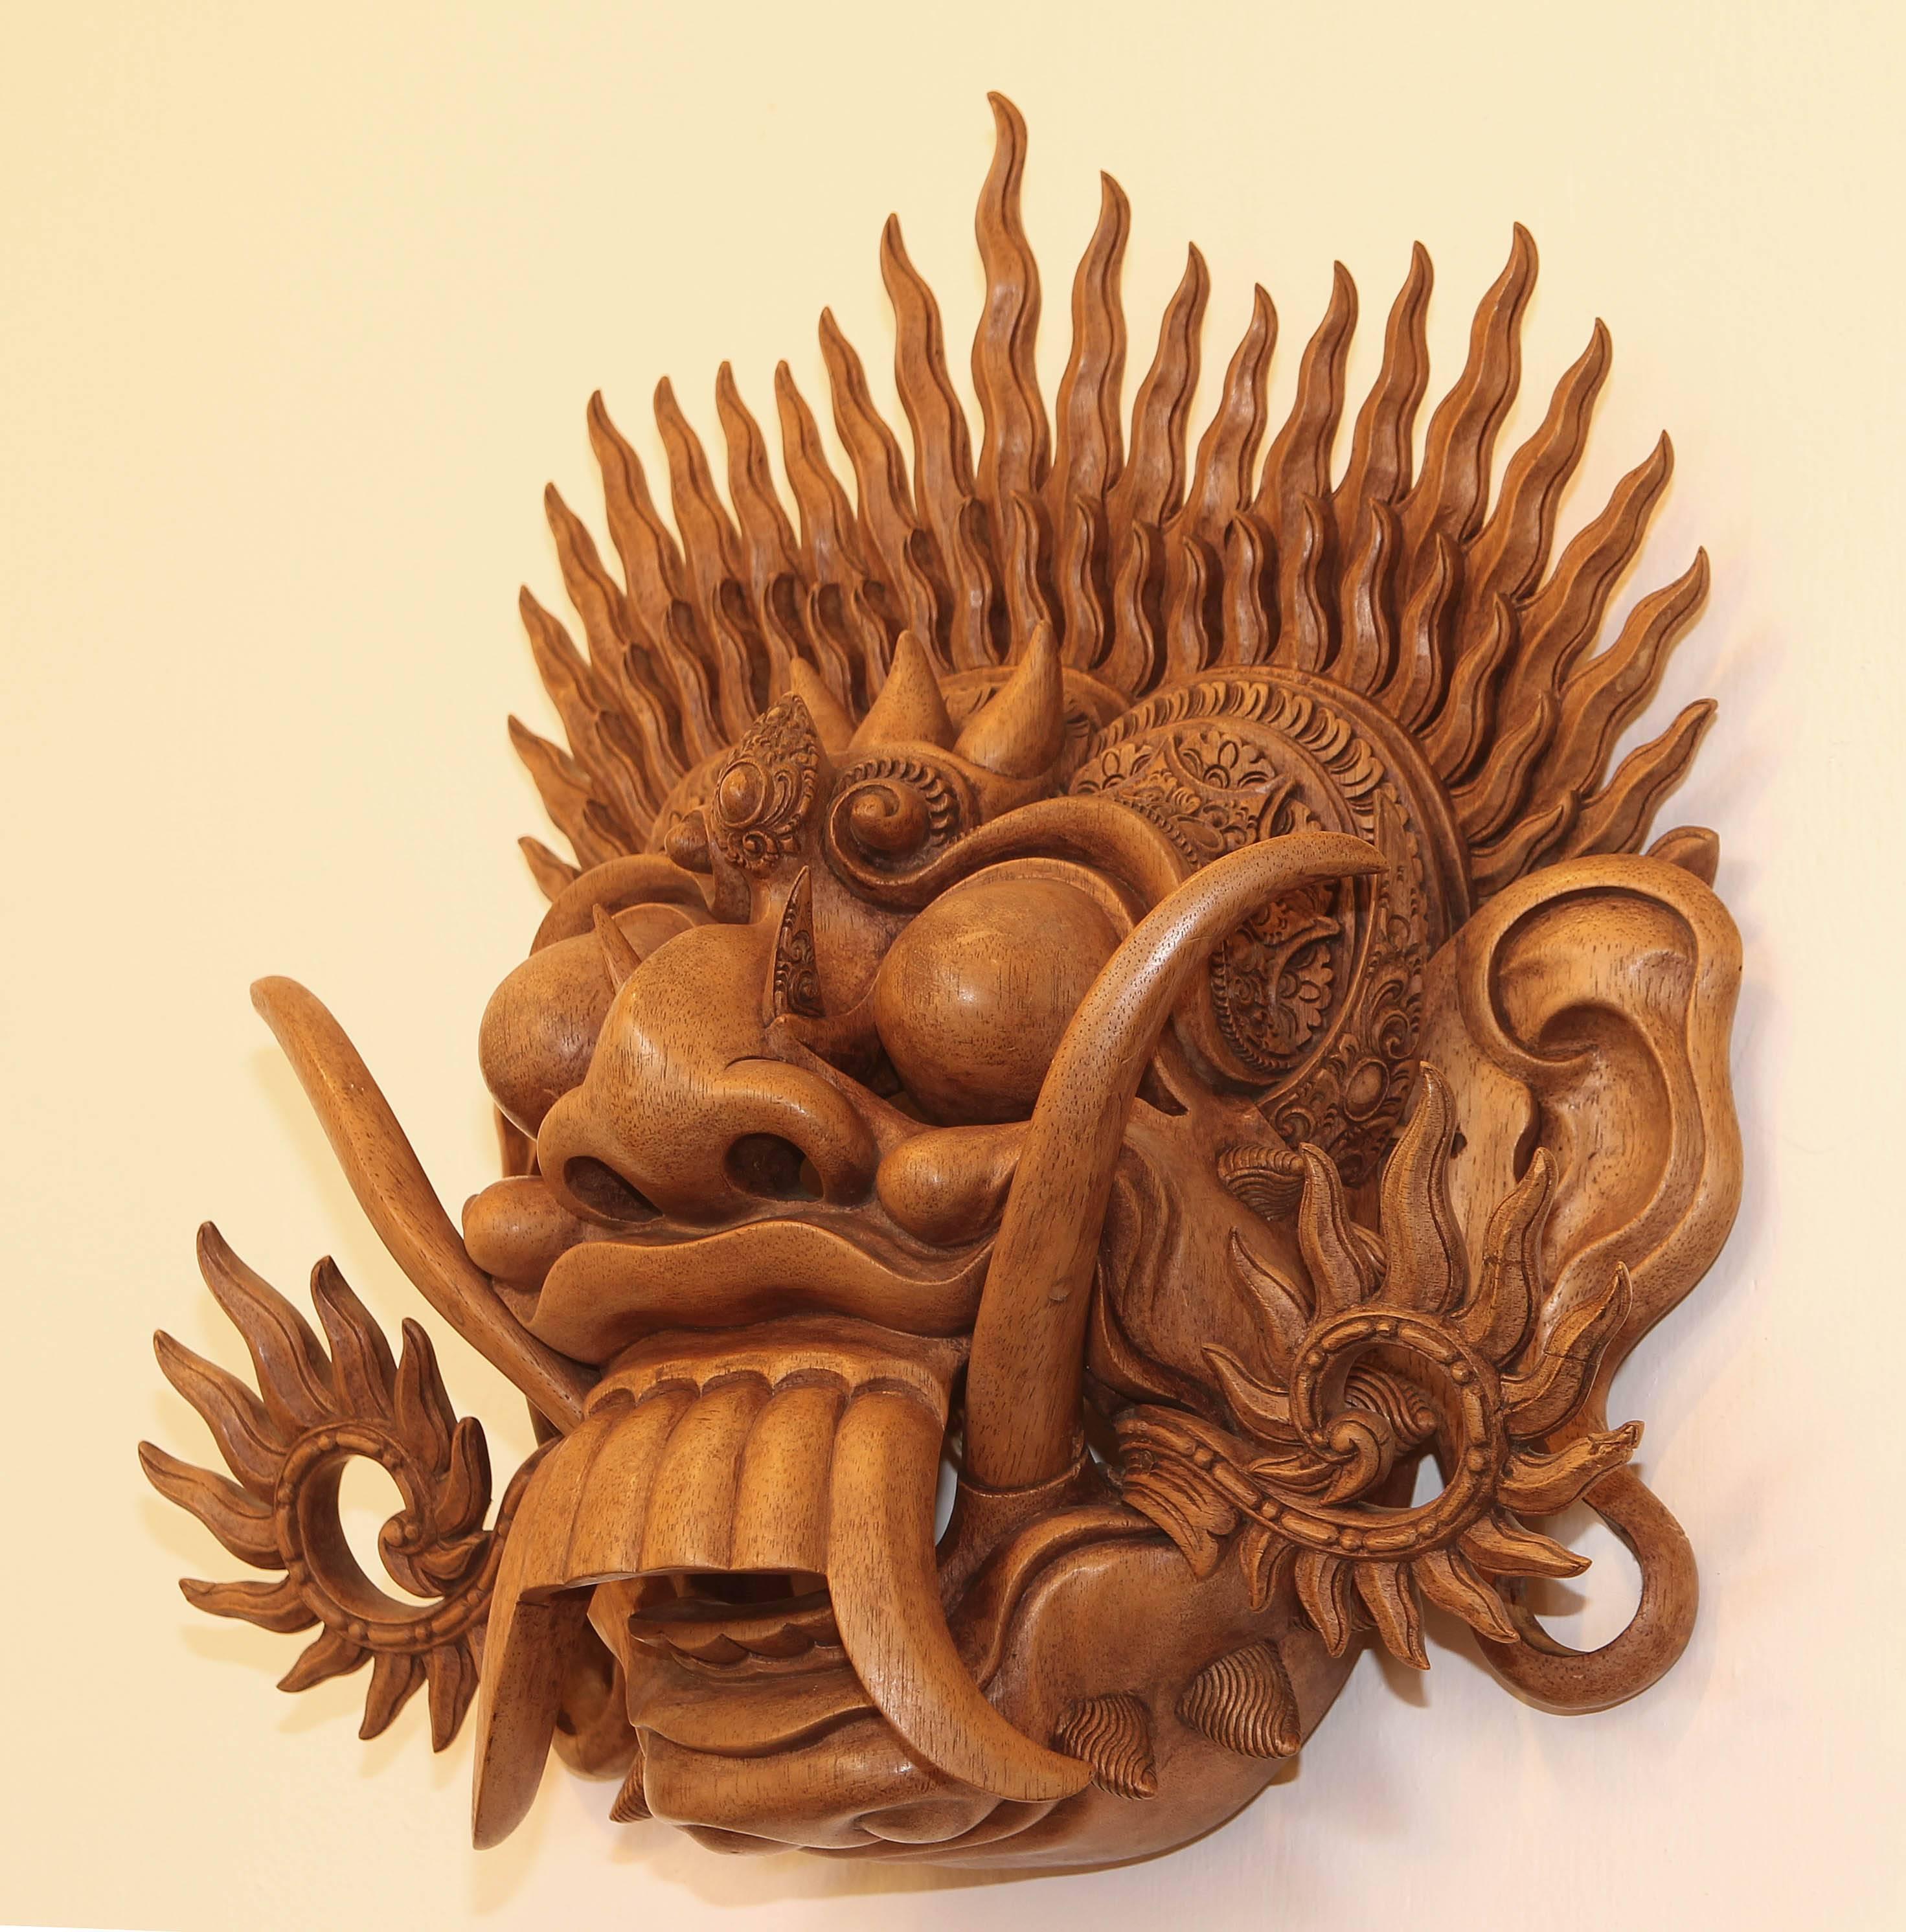 Finely carved mahogany Balinese mask. Barong is a lion like creature and character in the mythology of Bali, Indonesia. He is the king of the spirits, leader of the hosts of good.